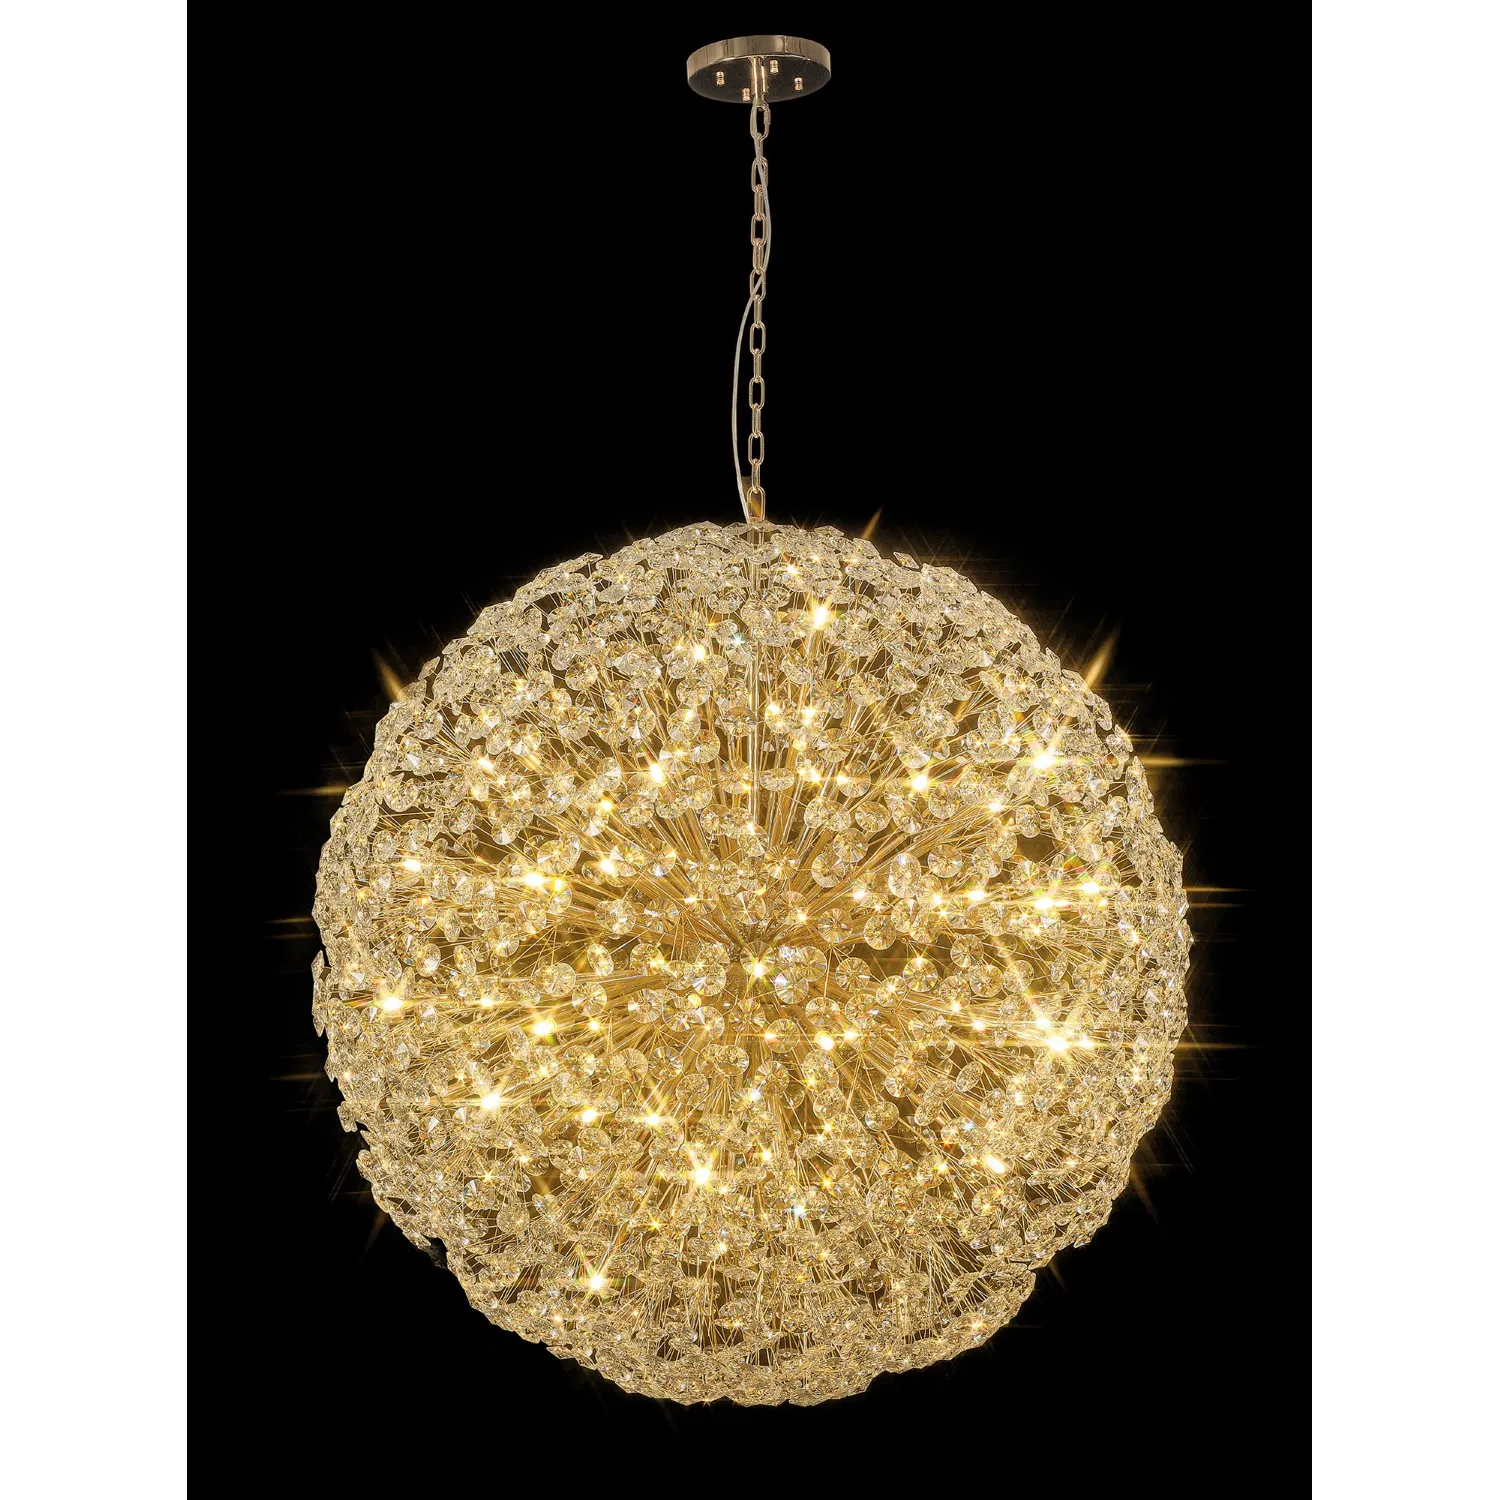 Camden Pendant 1.2m Sphere 64 Light G9 French Gold Crystal, Item Weight: 60kg